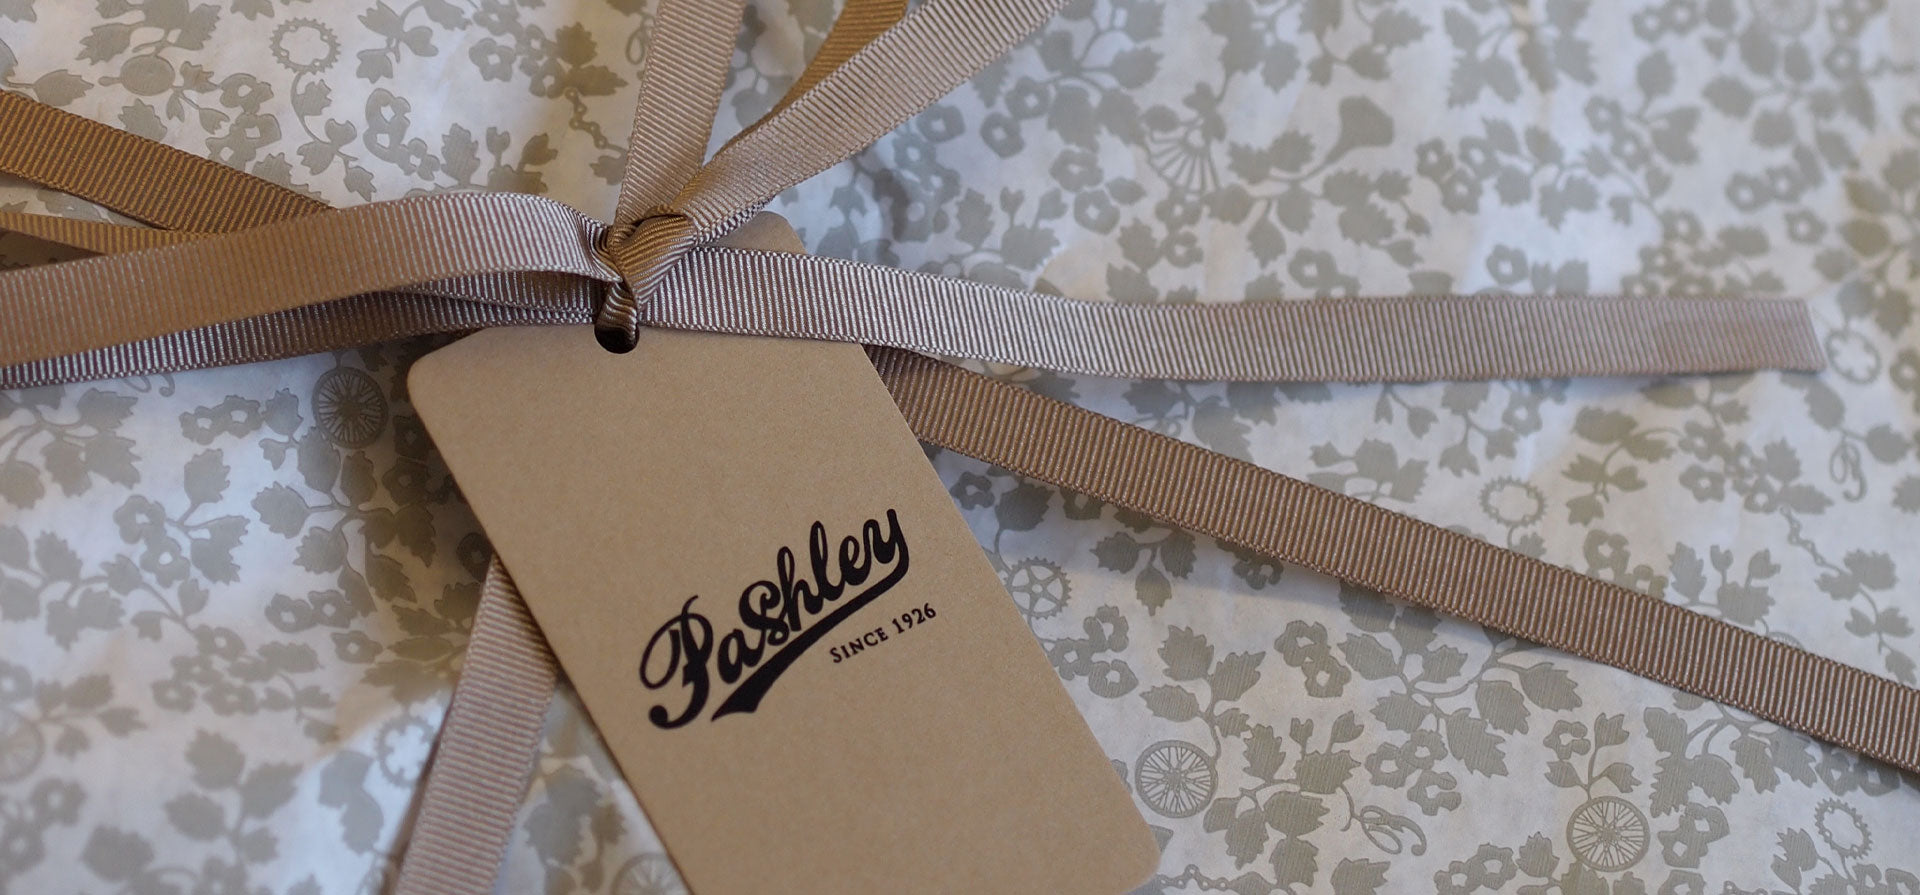 Gift wrapped in Pashley print wrapping paper with taupe ribbon and Pashley logo gift tag.